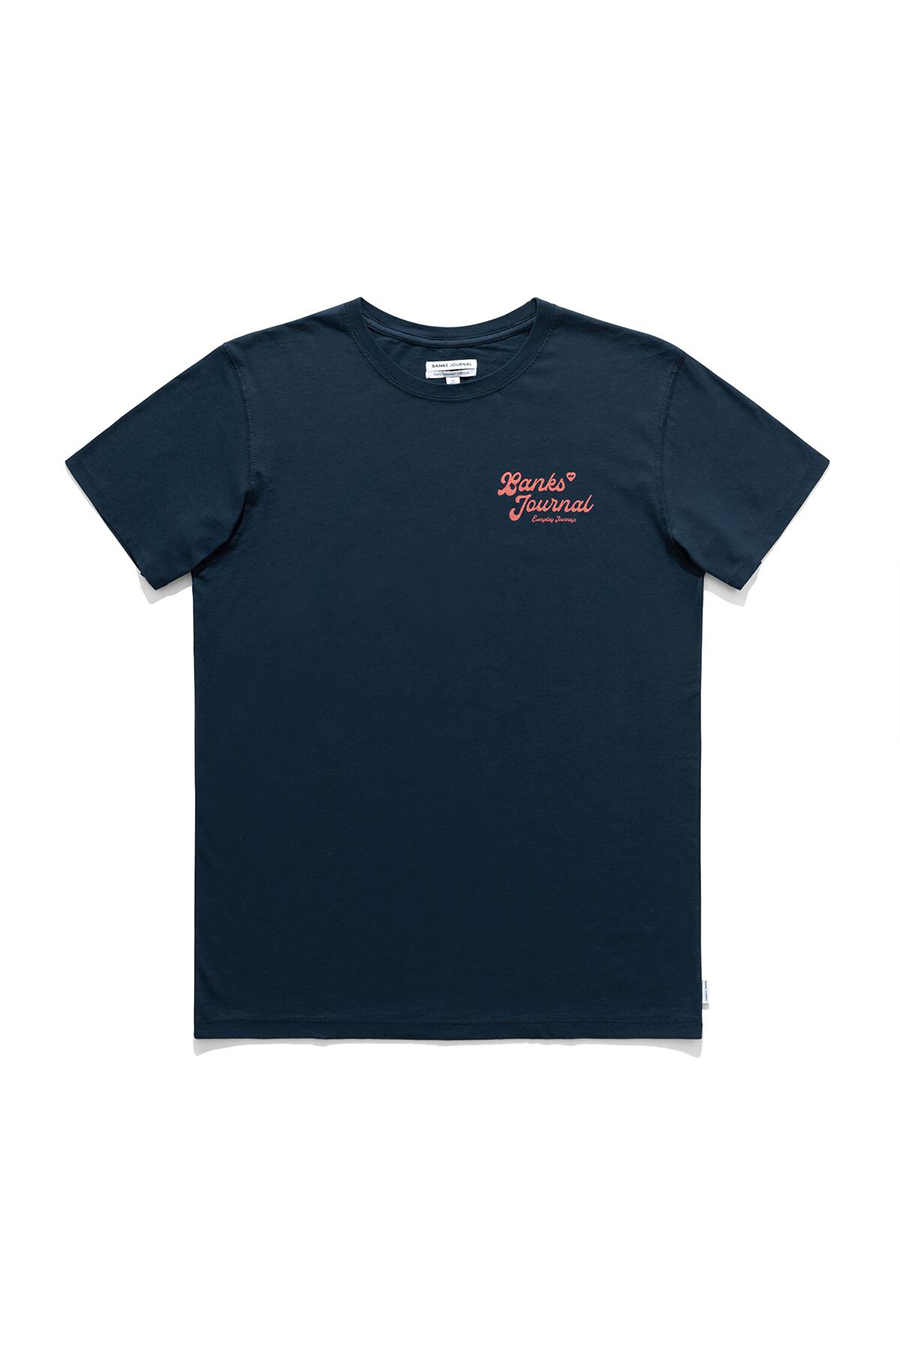 Welcome Faded Tee | Dirty Denim - Main Image Number 1 of 2